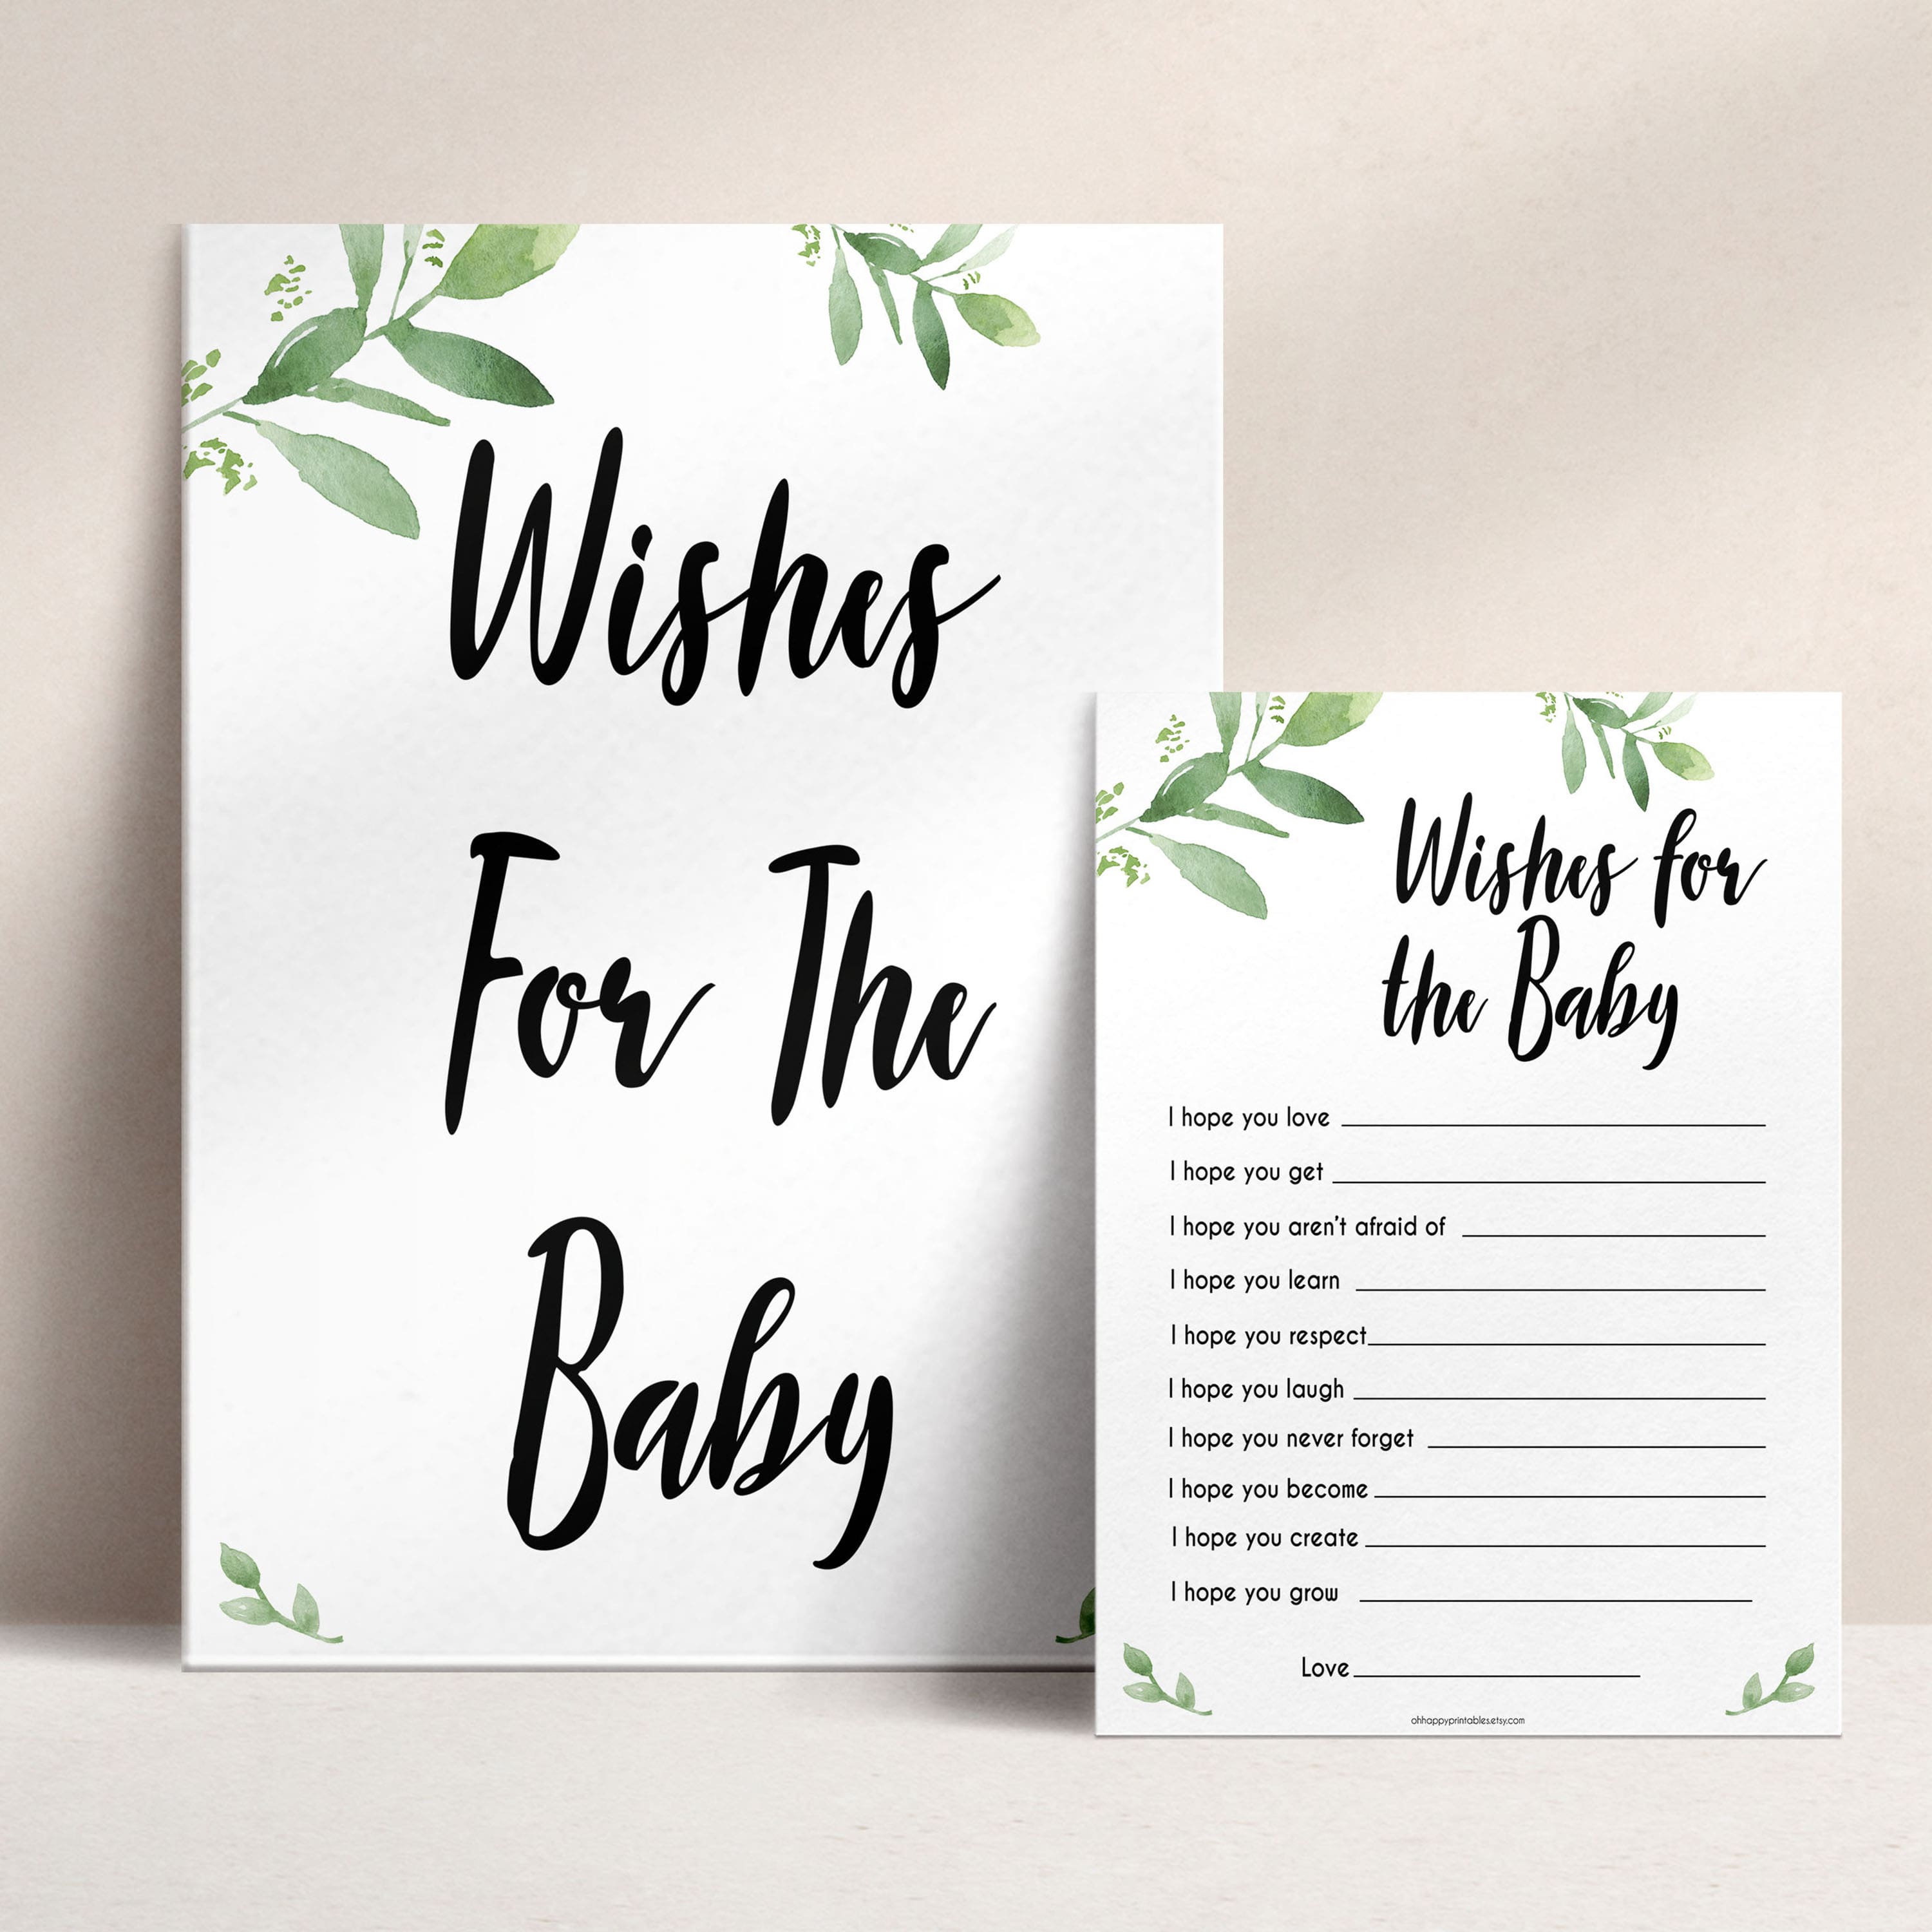 botanical wishes for the baby baby shower games, printable baby shower games, fun baby shower games, popular baby shower games